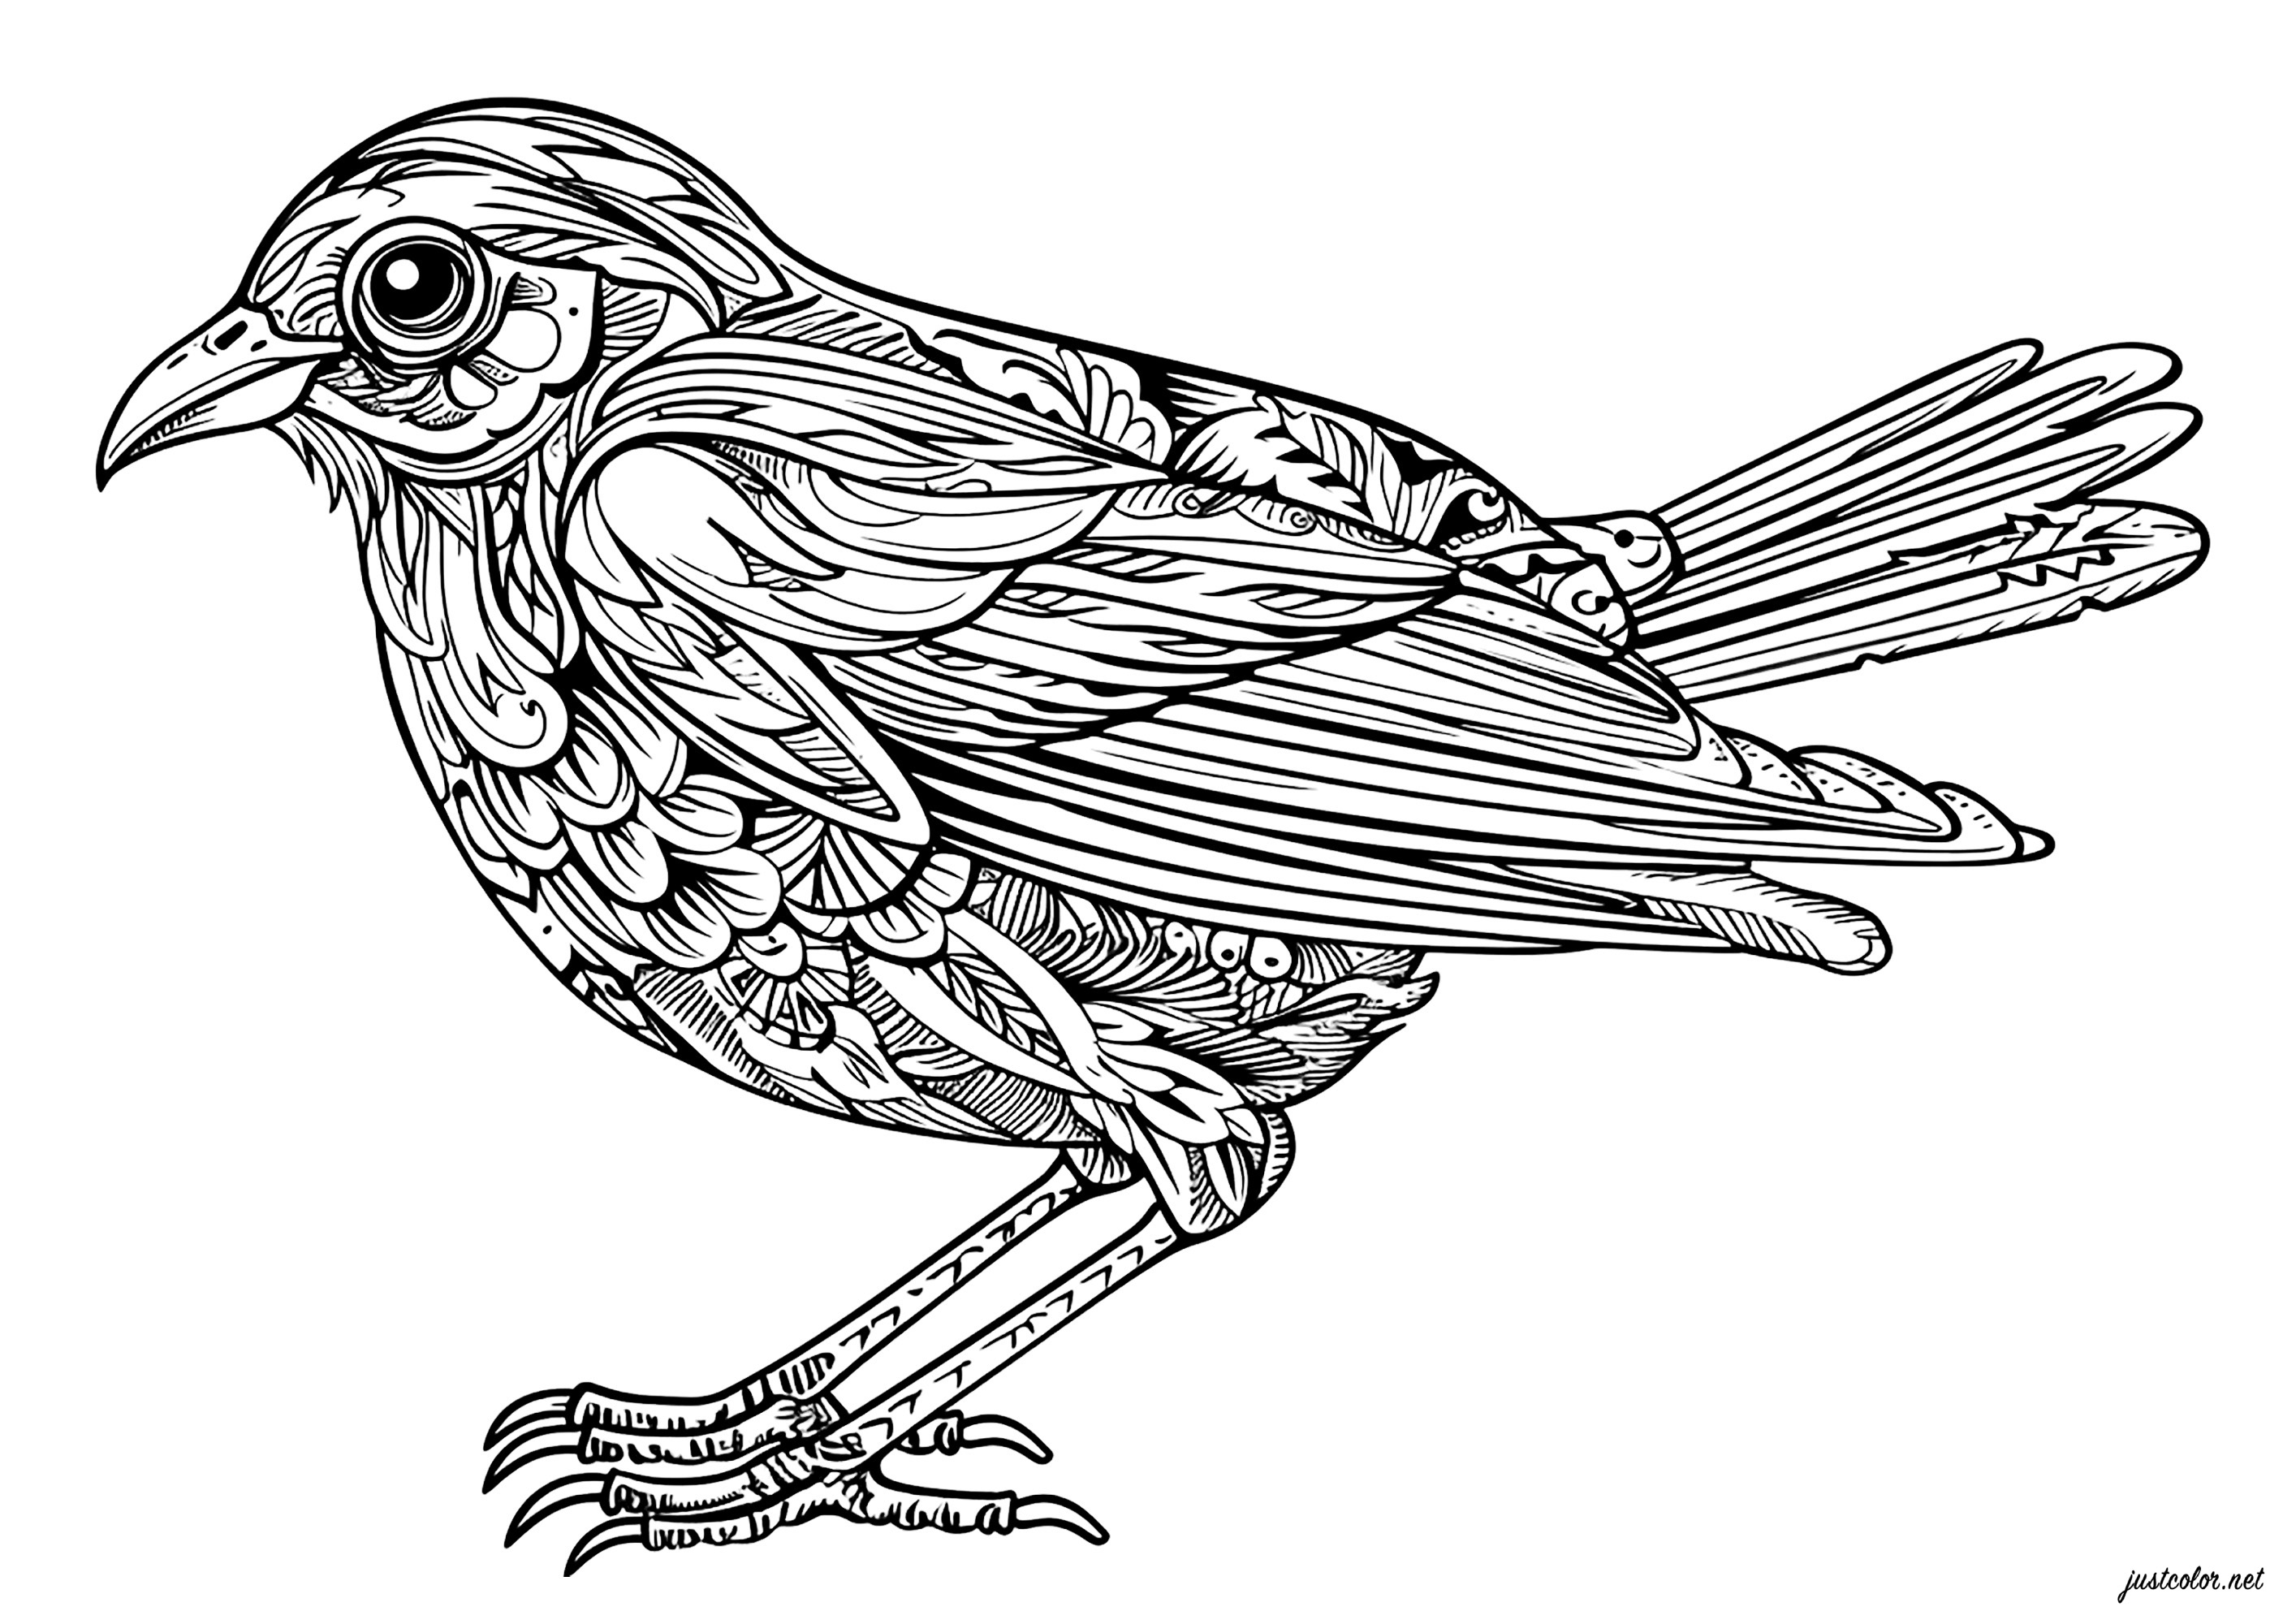 Bird with regular, intricate patterns - Birds Adult Coloring Pages